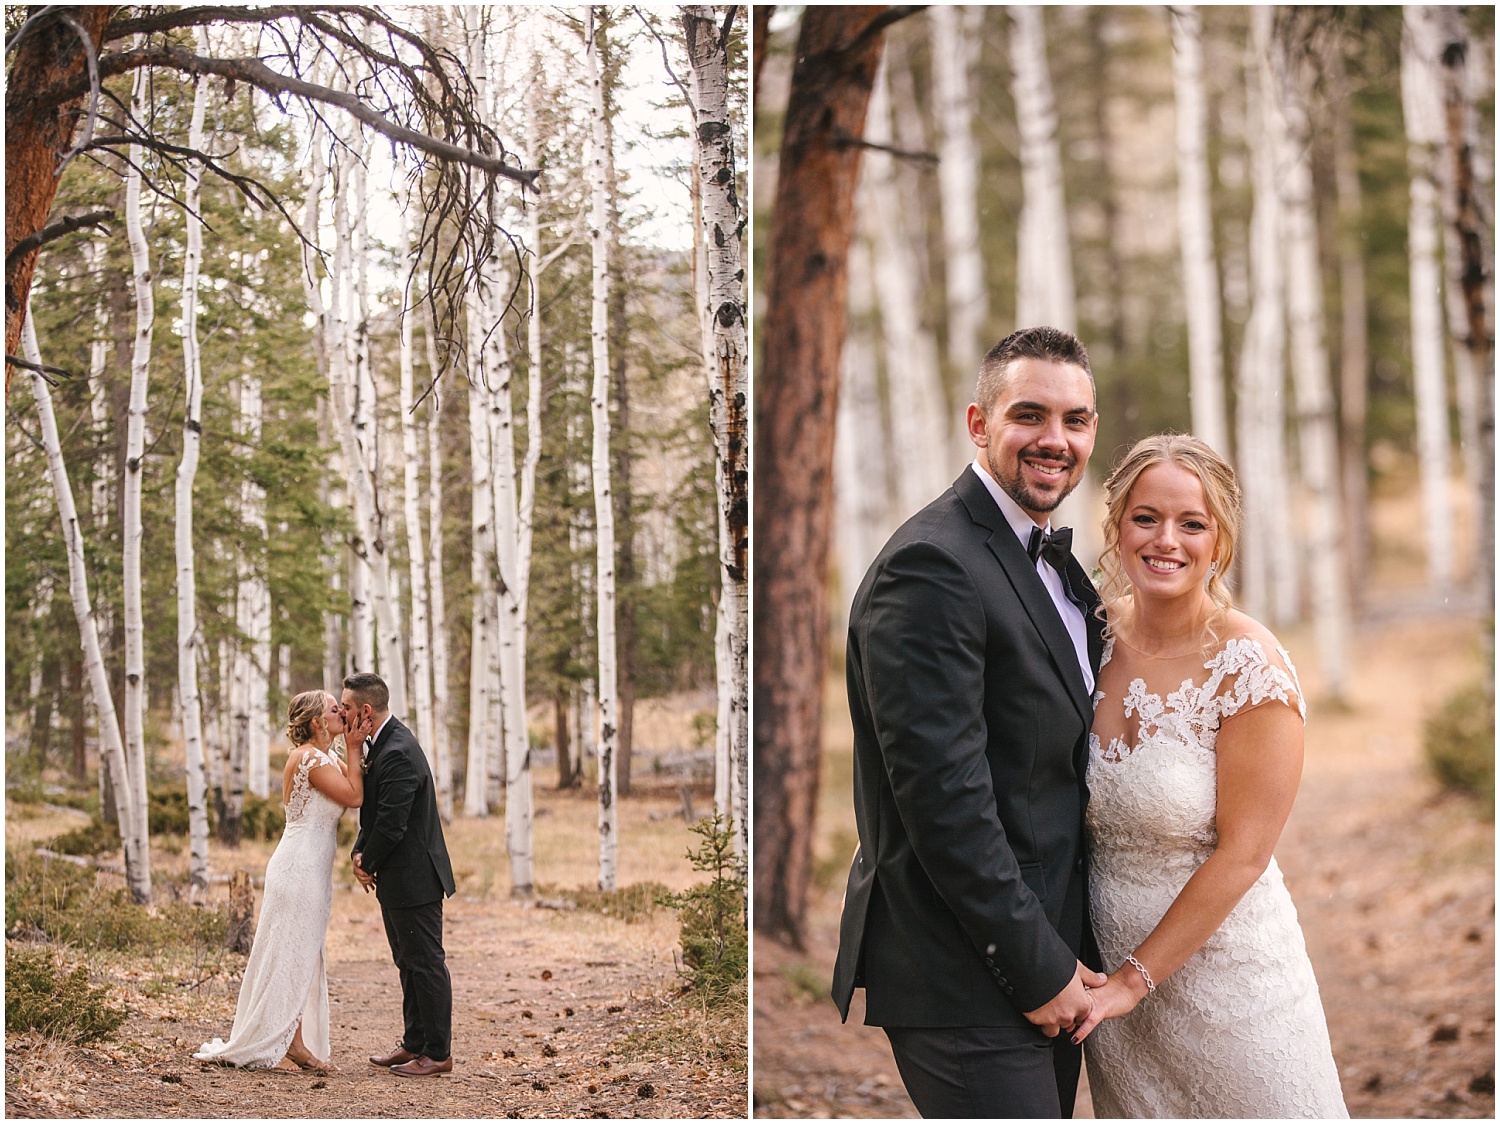 Woodland Park elopement in the aspen forest